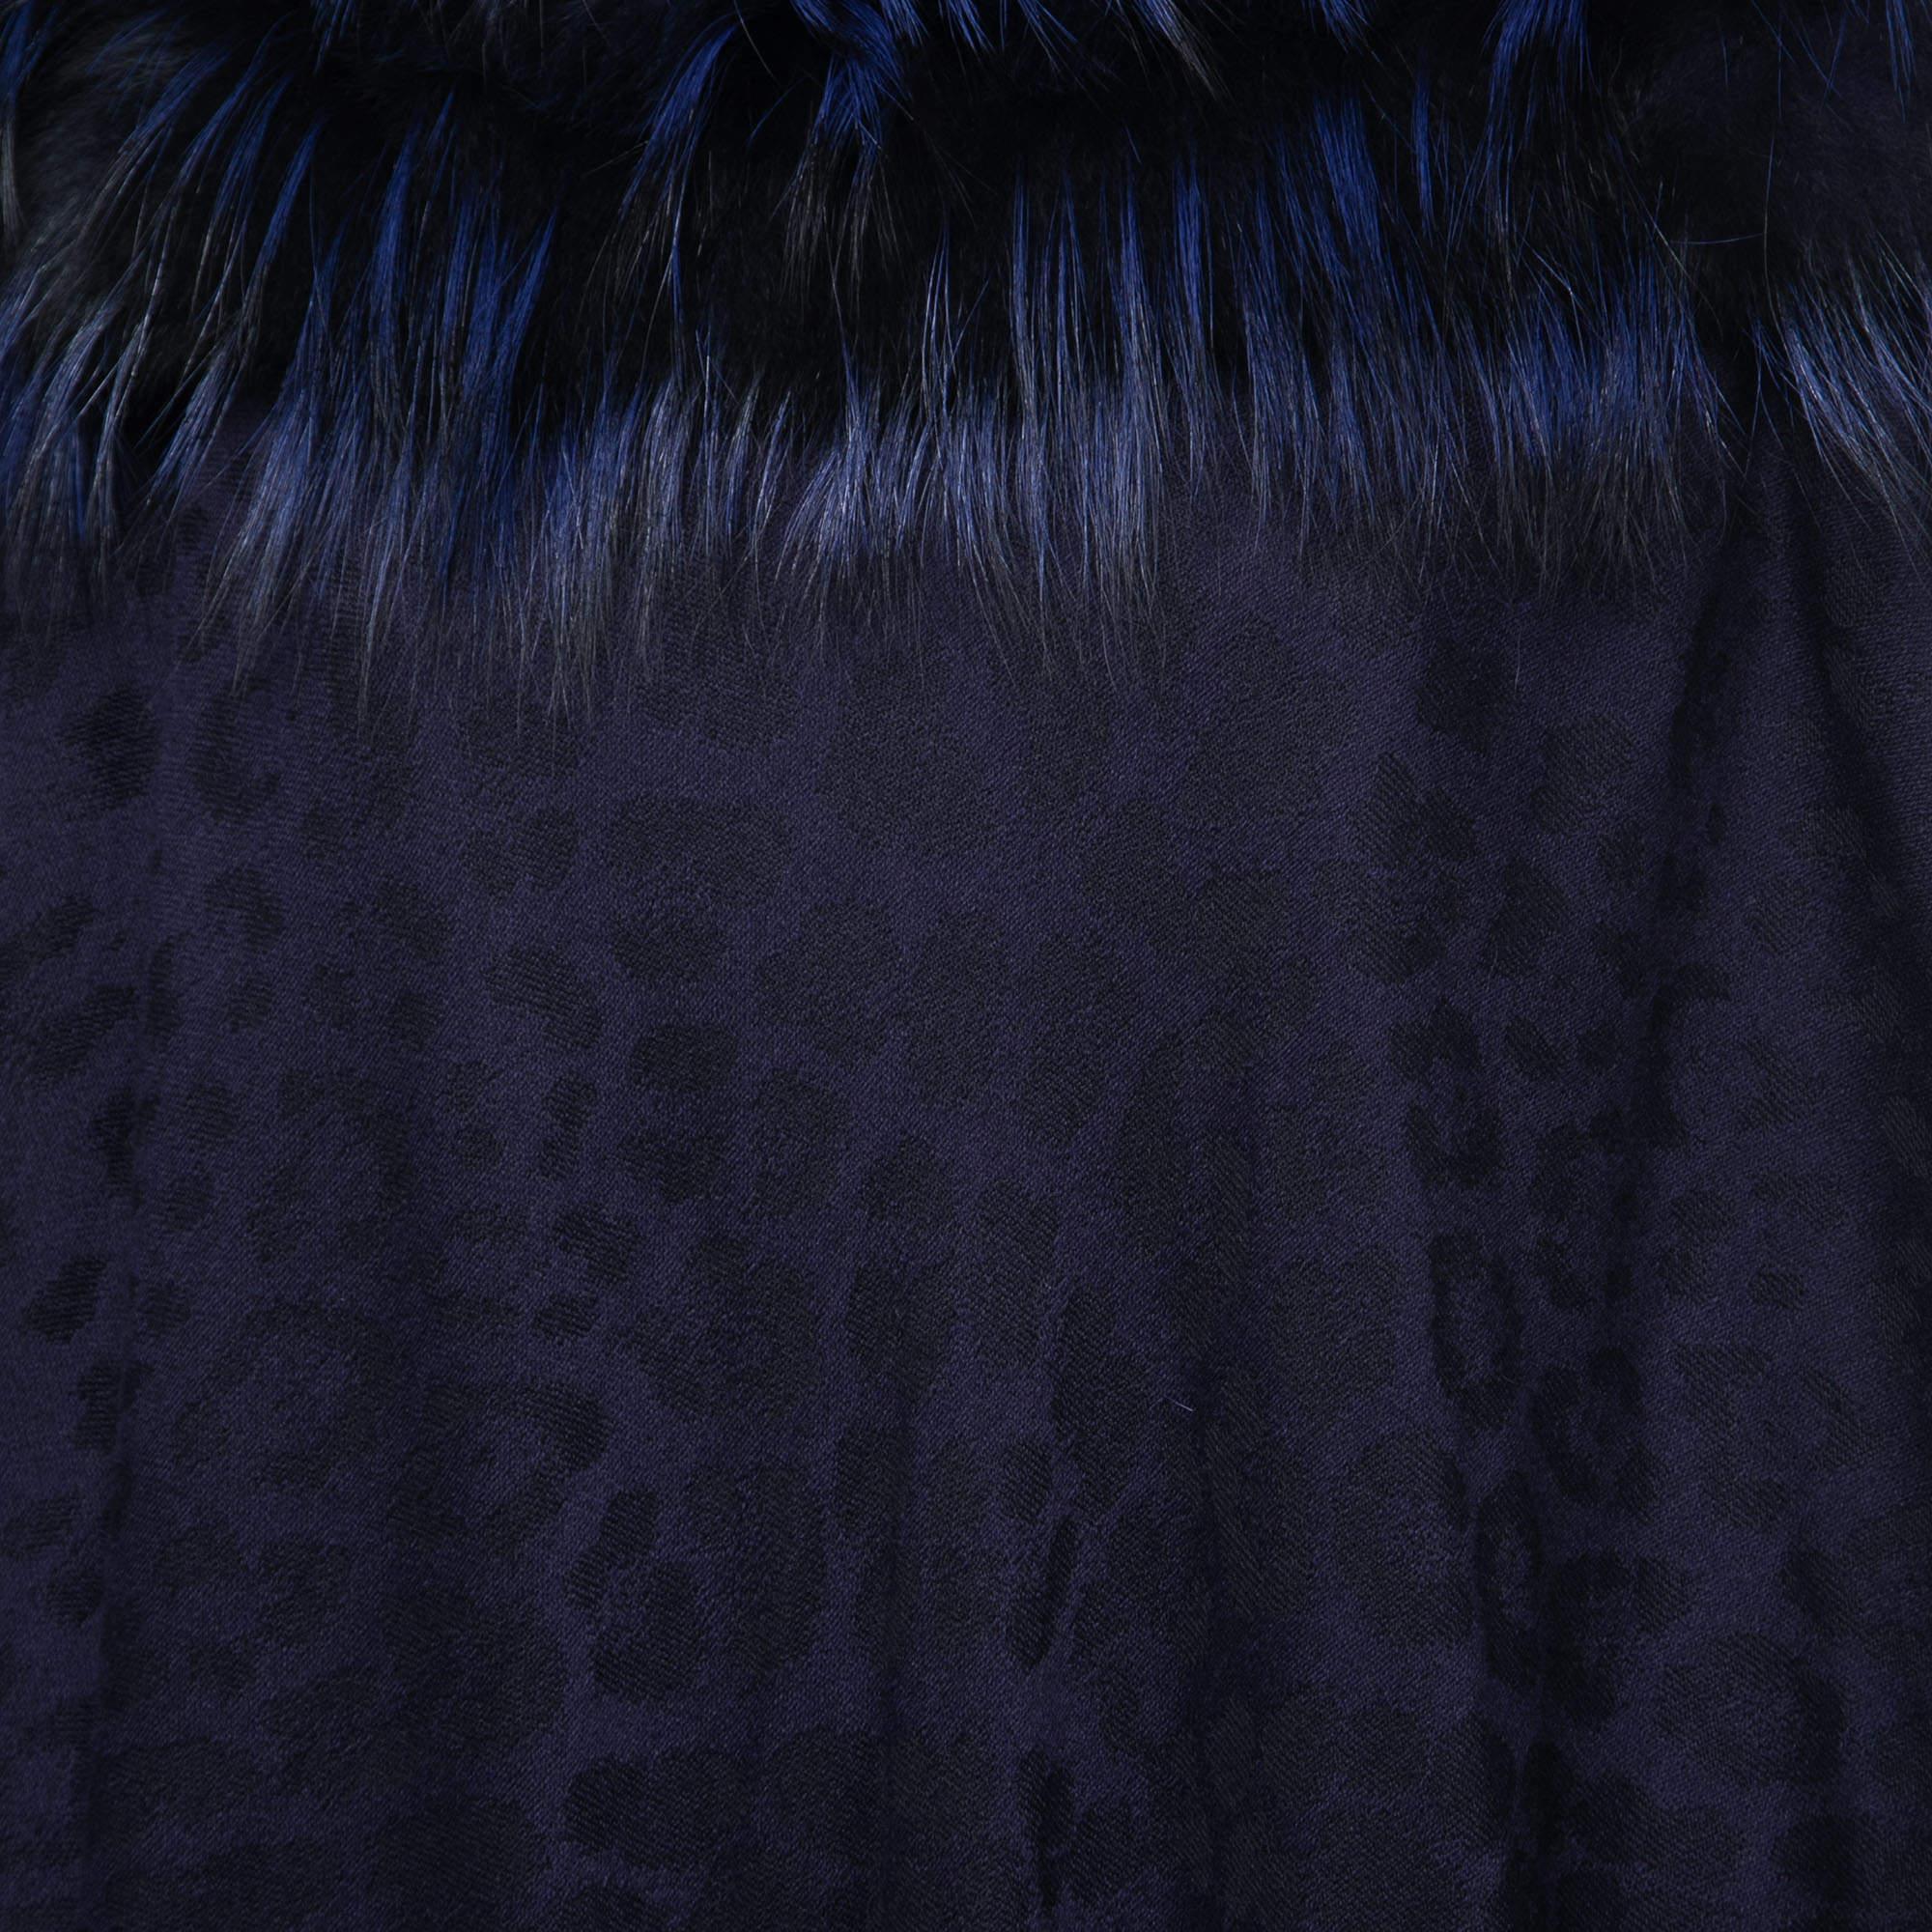 Roberto Cavalli has designed this poncho with intricate details and perfection. Give your look a luxe twist by adding this beautiful blue creation featuring a desirable silhouette. Made from a blend of wool, it has fur trims and an enveloping shape